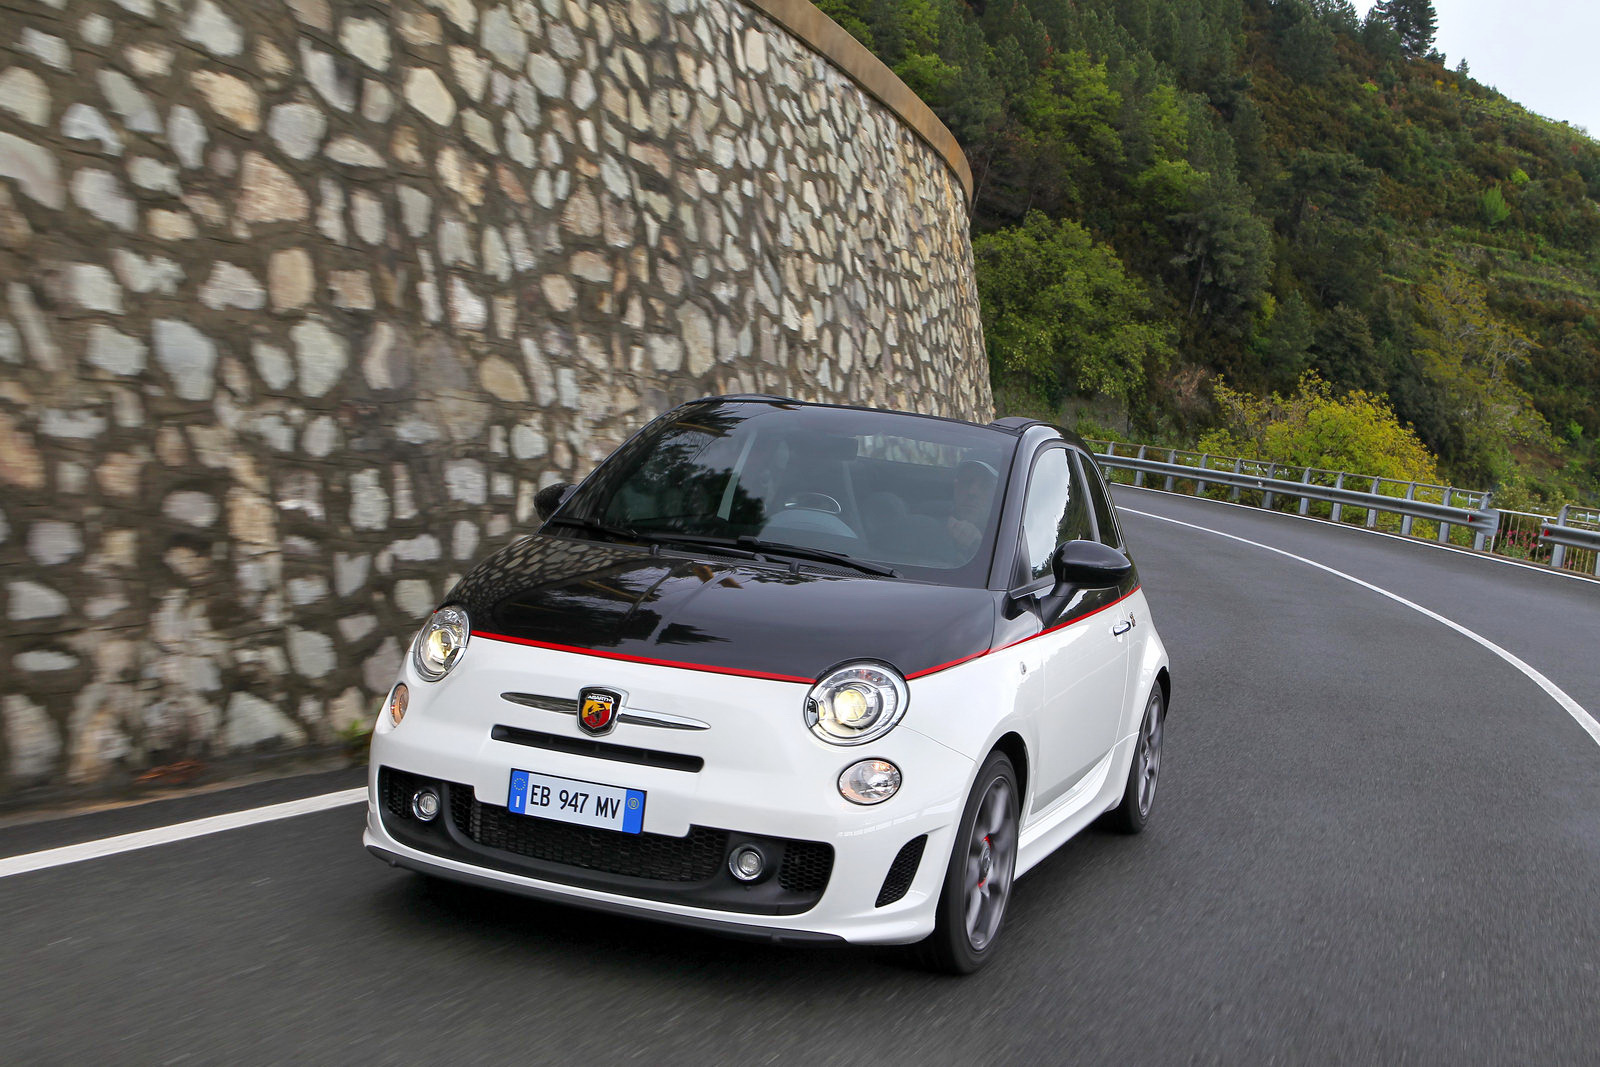 ... Pictures And wallpapers: Best Fiat Abarth 500C Convertible Wallpaper